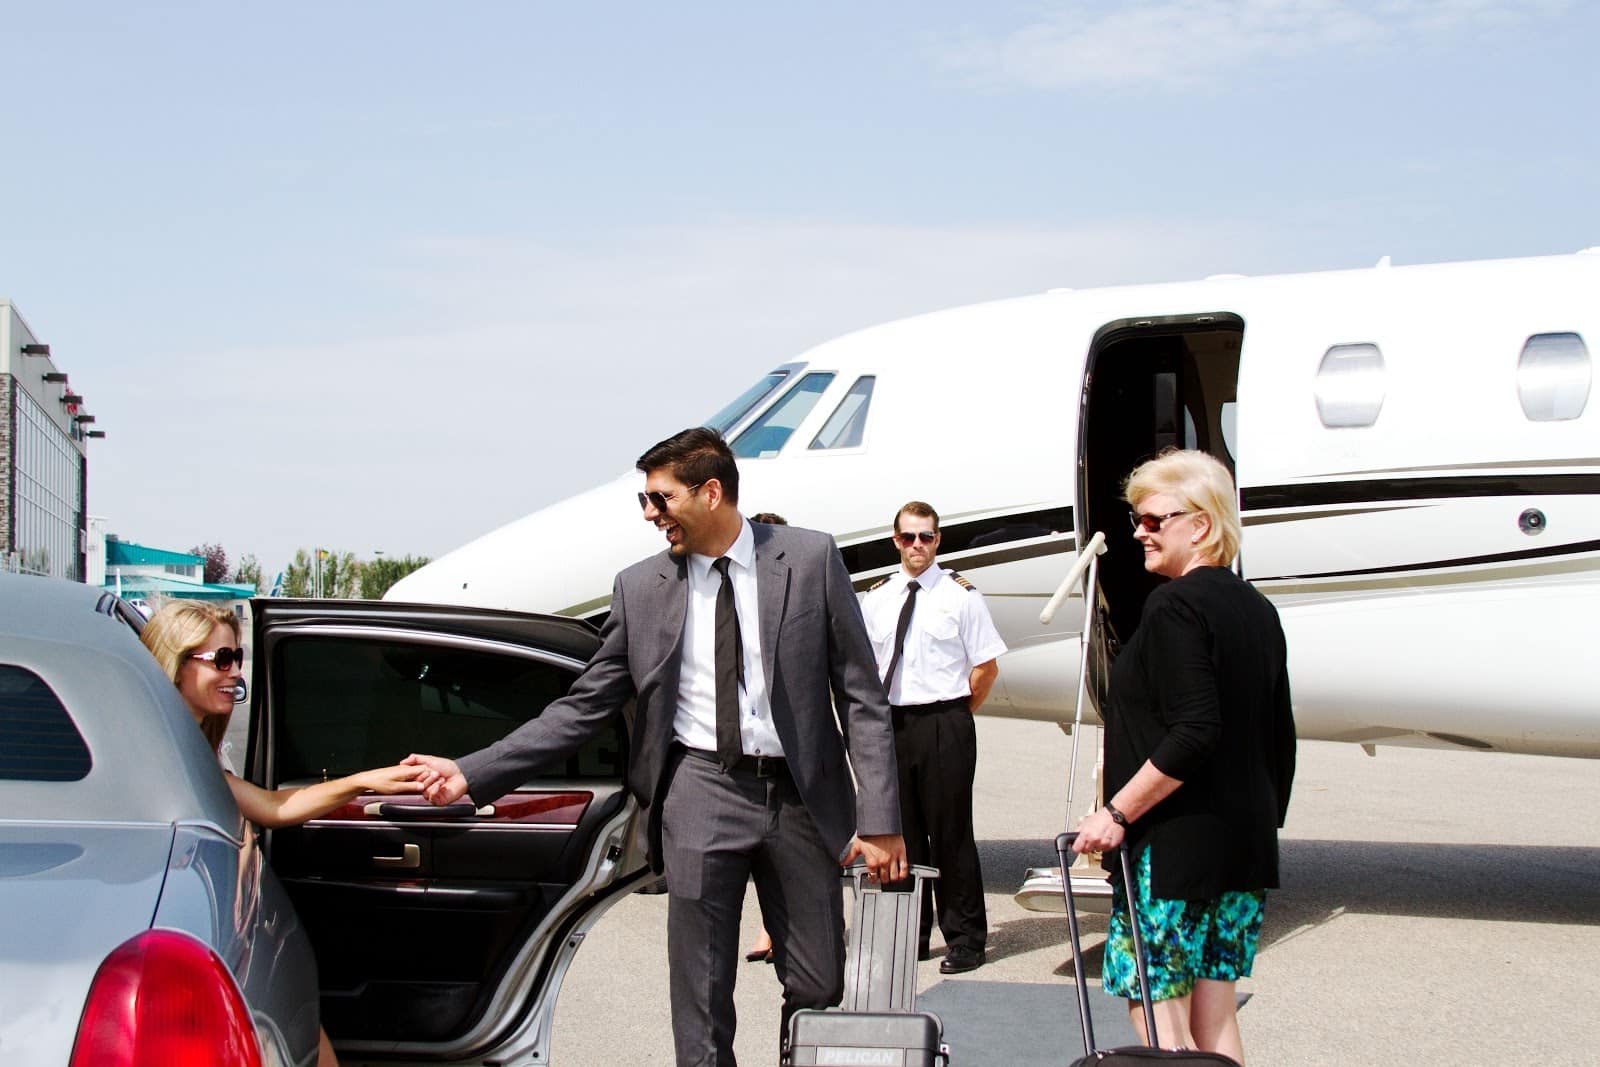 A wealthy family gets out of a private car and into a private jet